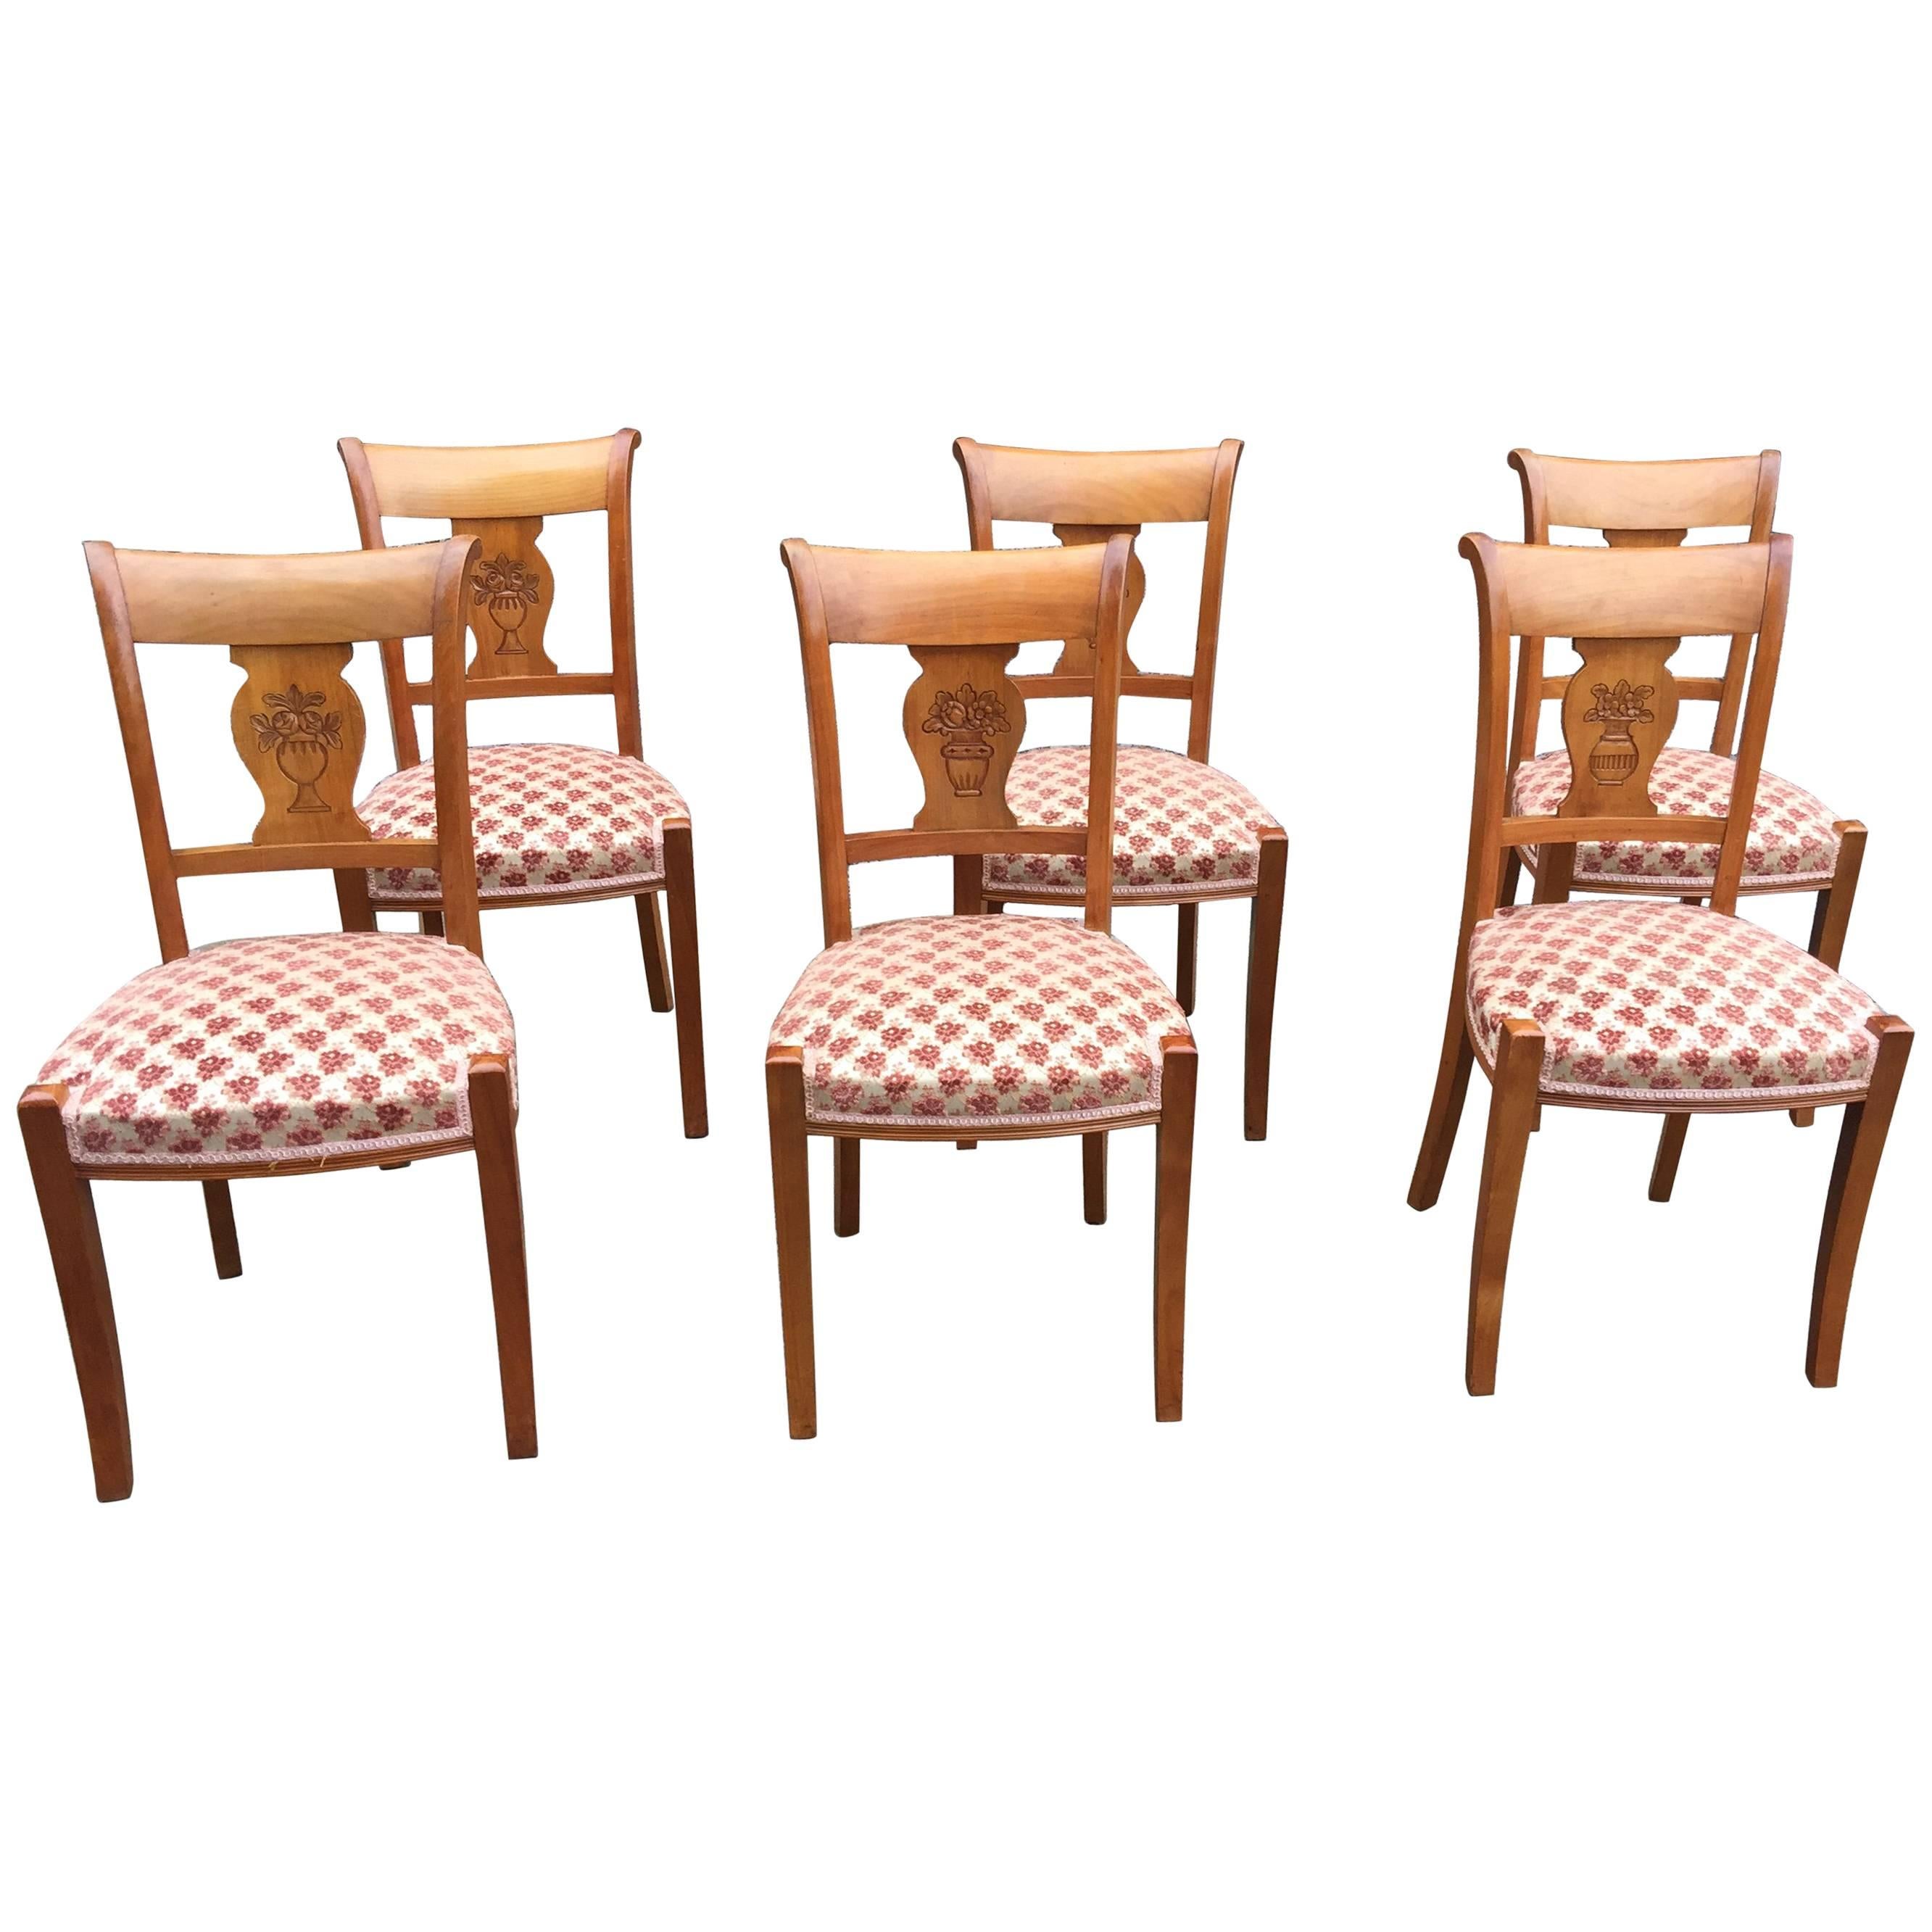 Set of Six Neoclassical Chairs in Cherrywood, circa 1940